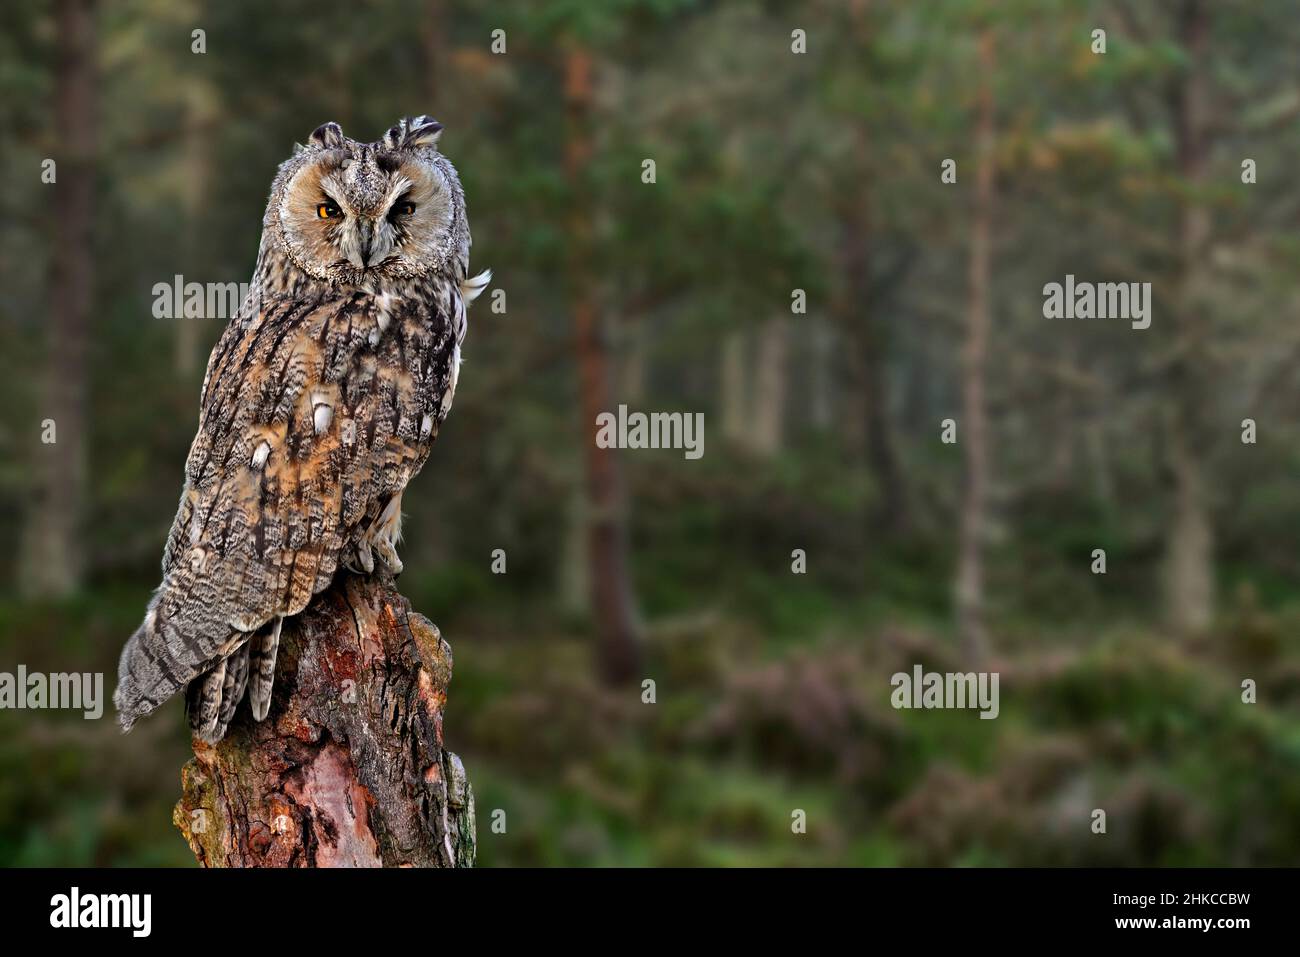 Long-eared owl (Asio otus) perched on tree stump at edge of pine forest at dusk Stock Photo